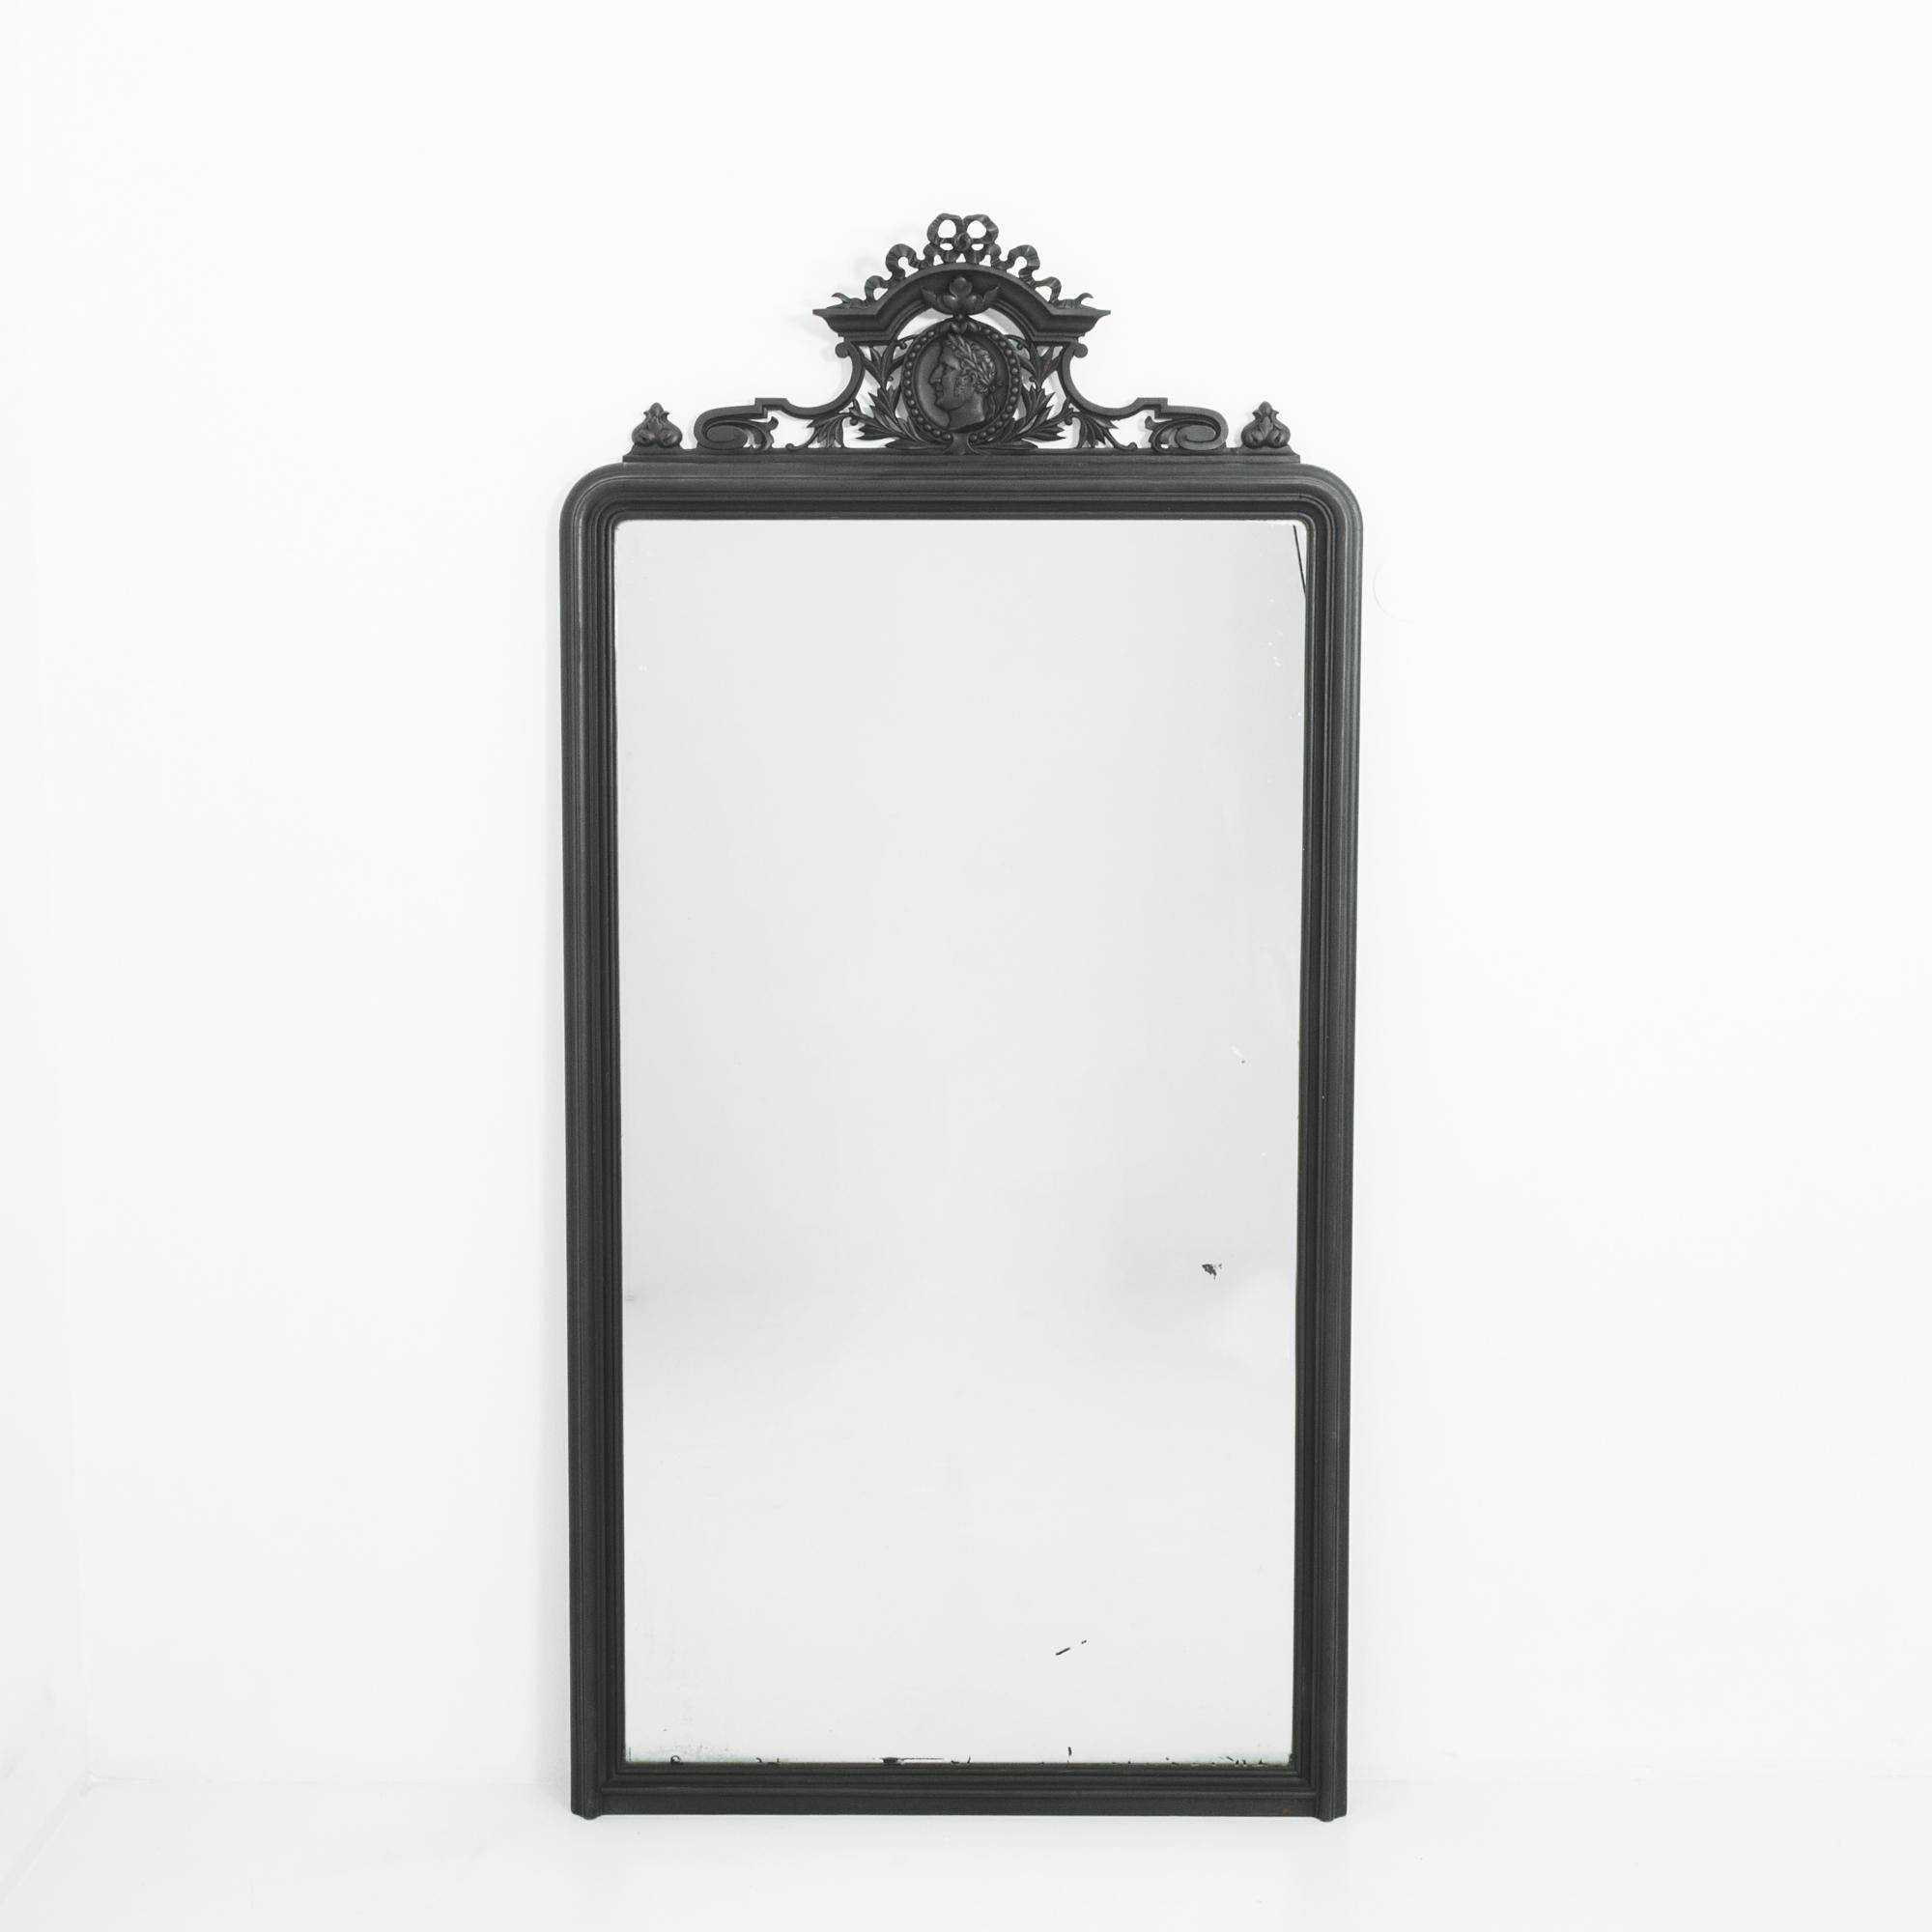 A wooden framed mirror, produced in France in the 1880s. The stark outline of the black frame lends to the commanding presence of this six foot eight inch neoclassical antique. These restrained lines are juxtaposed against an ornate crest of bowed